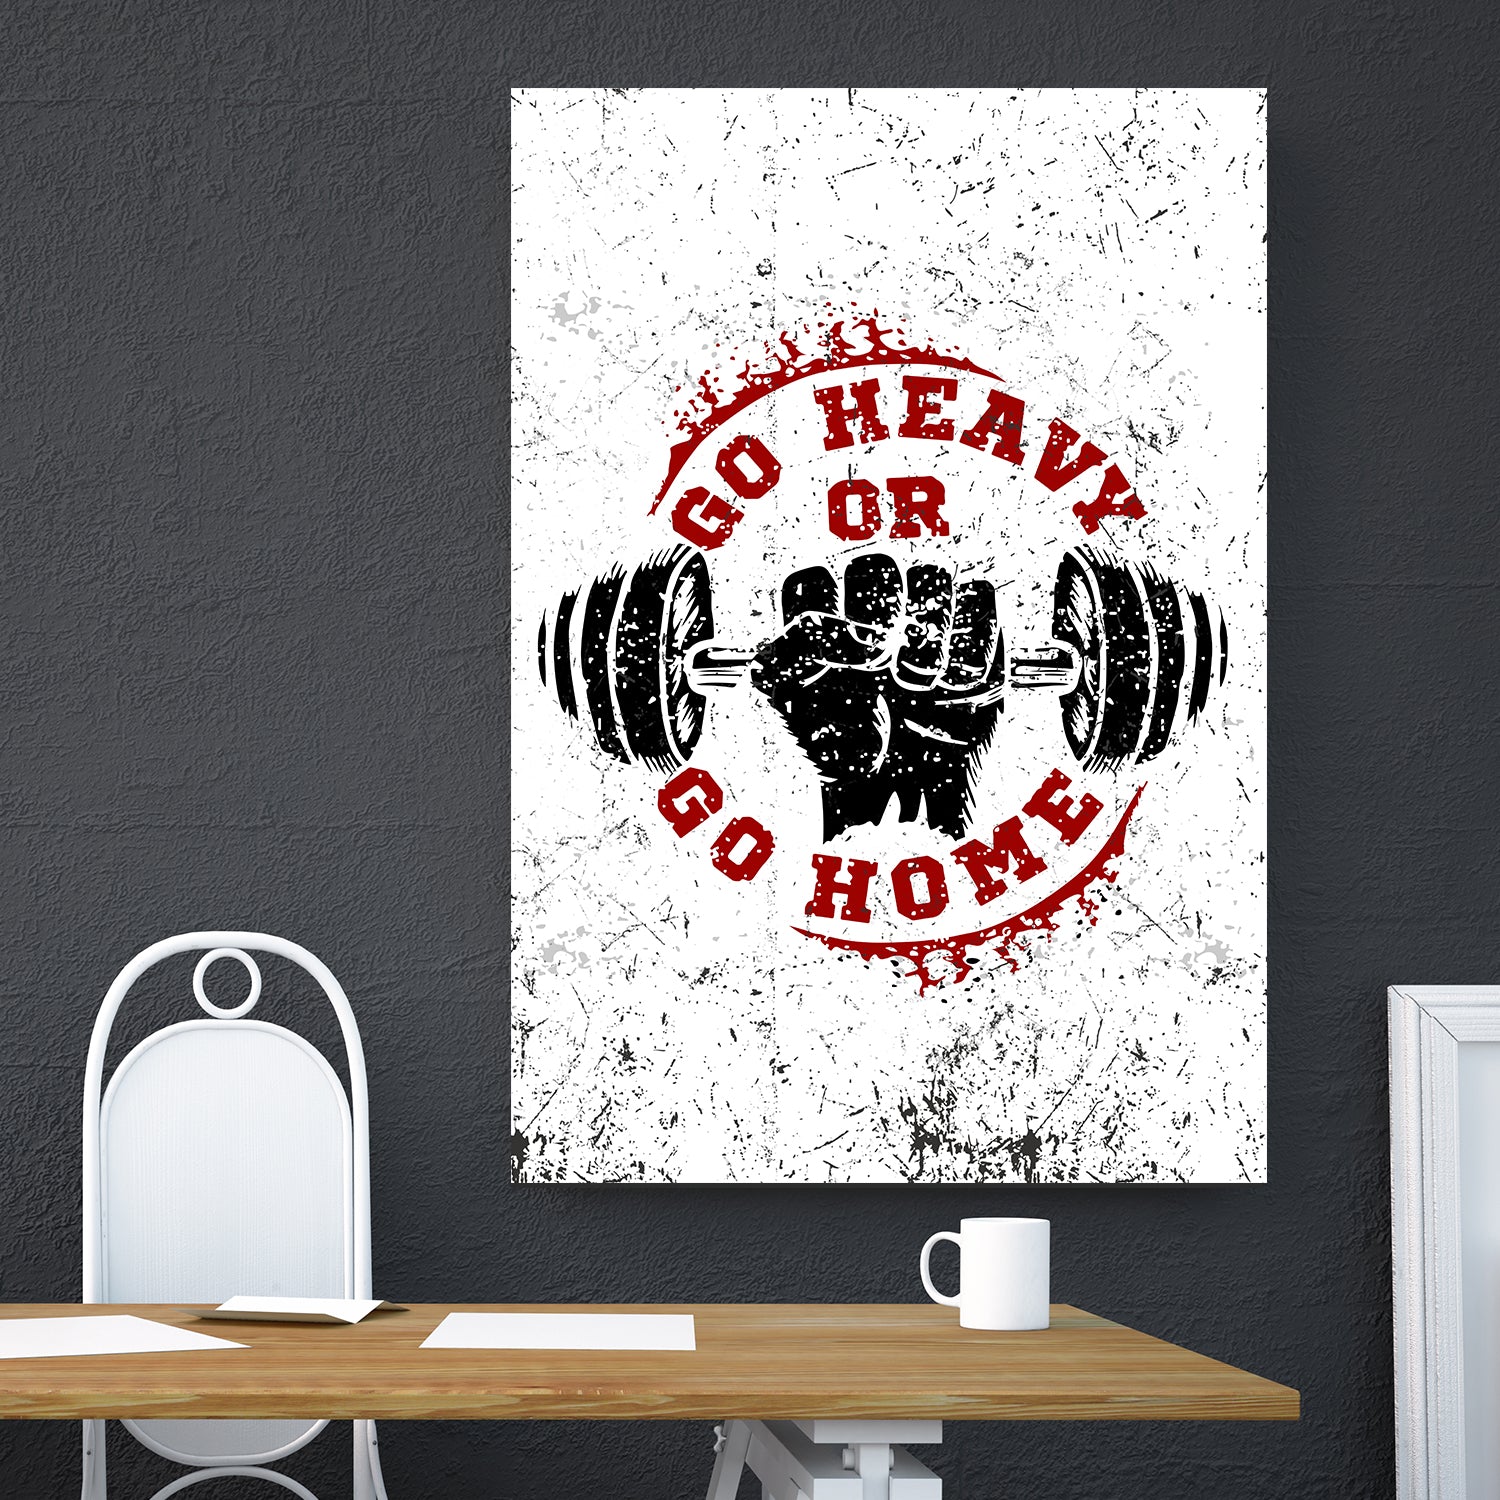 Home Gym Decor Gym Rules Poster Canvas Gym Gifts – Style My Pride